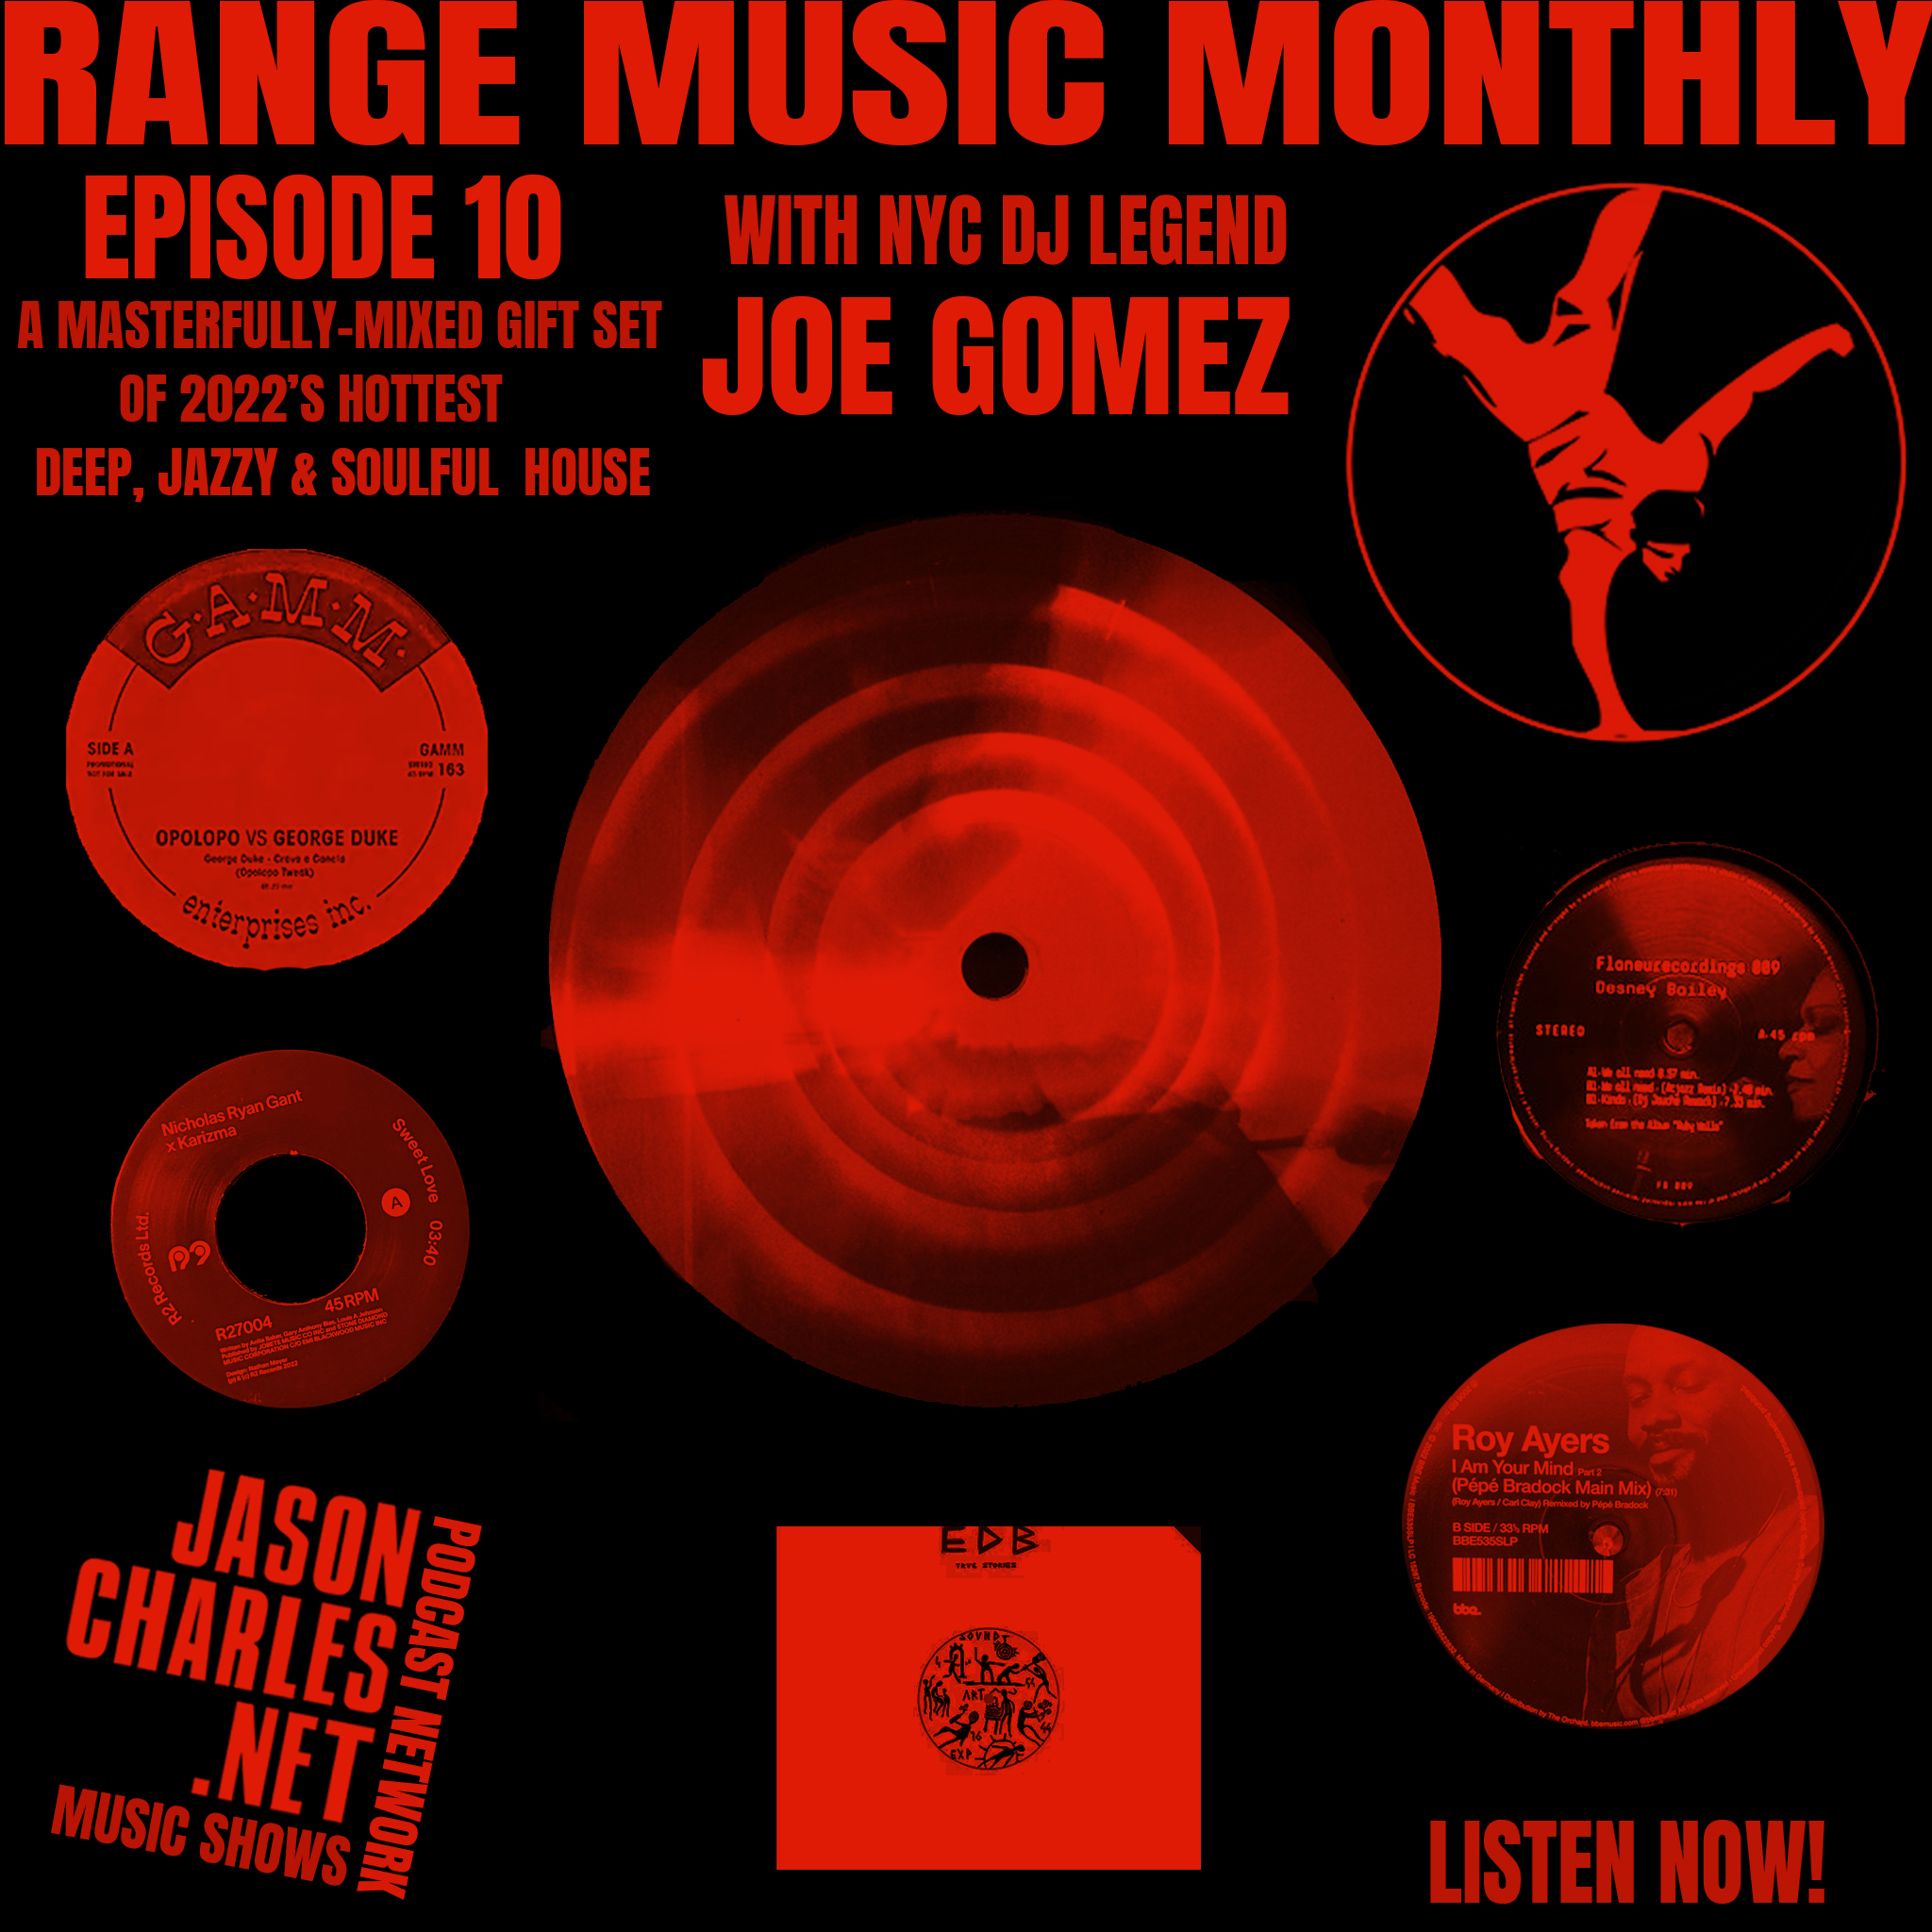 RANGE MUSIC MONTHLY Episode 10 Deep, Jazzy & Soulful House Gift Set